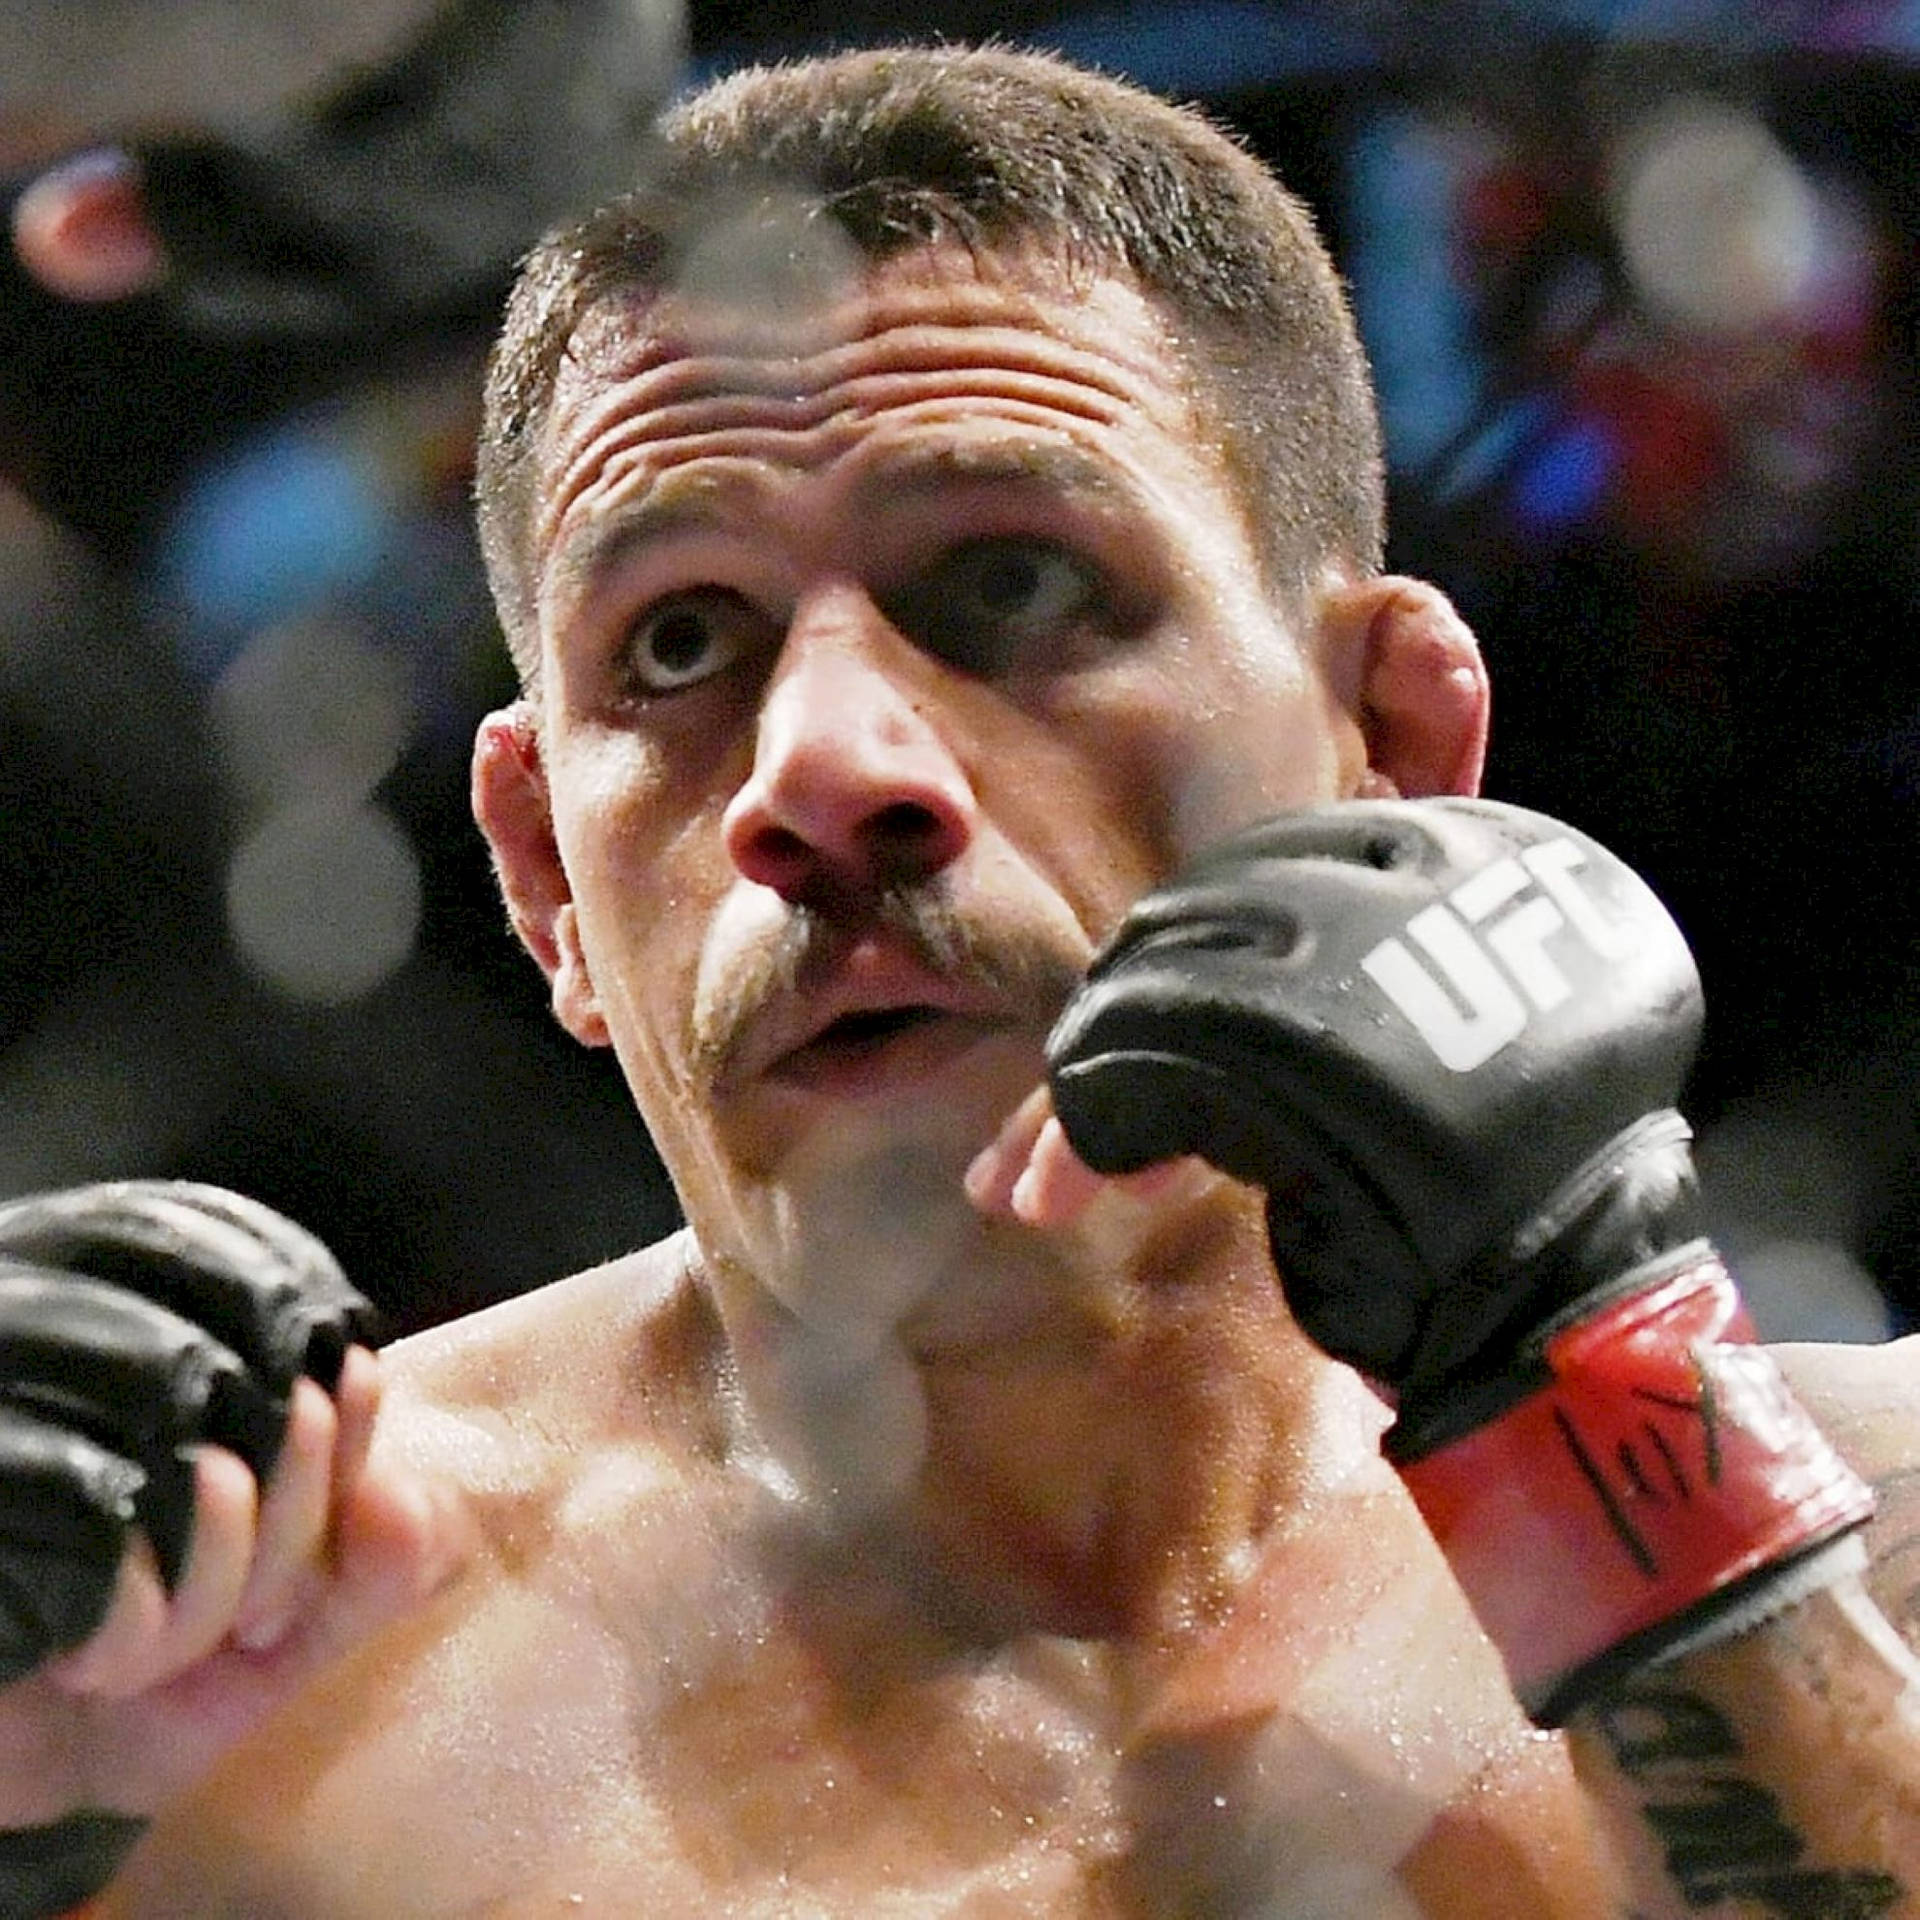 Rafael Dos Anjos - Focused and Ready for the Battle Wallpaper